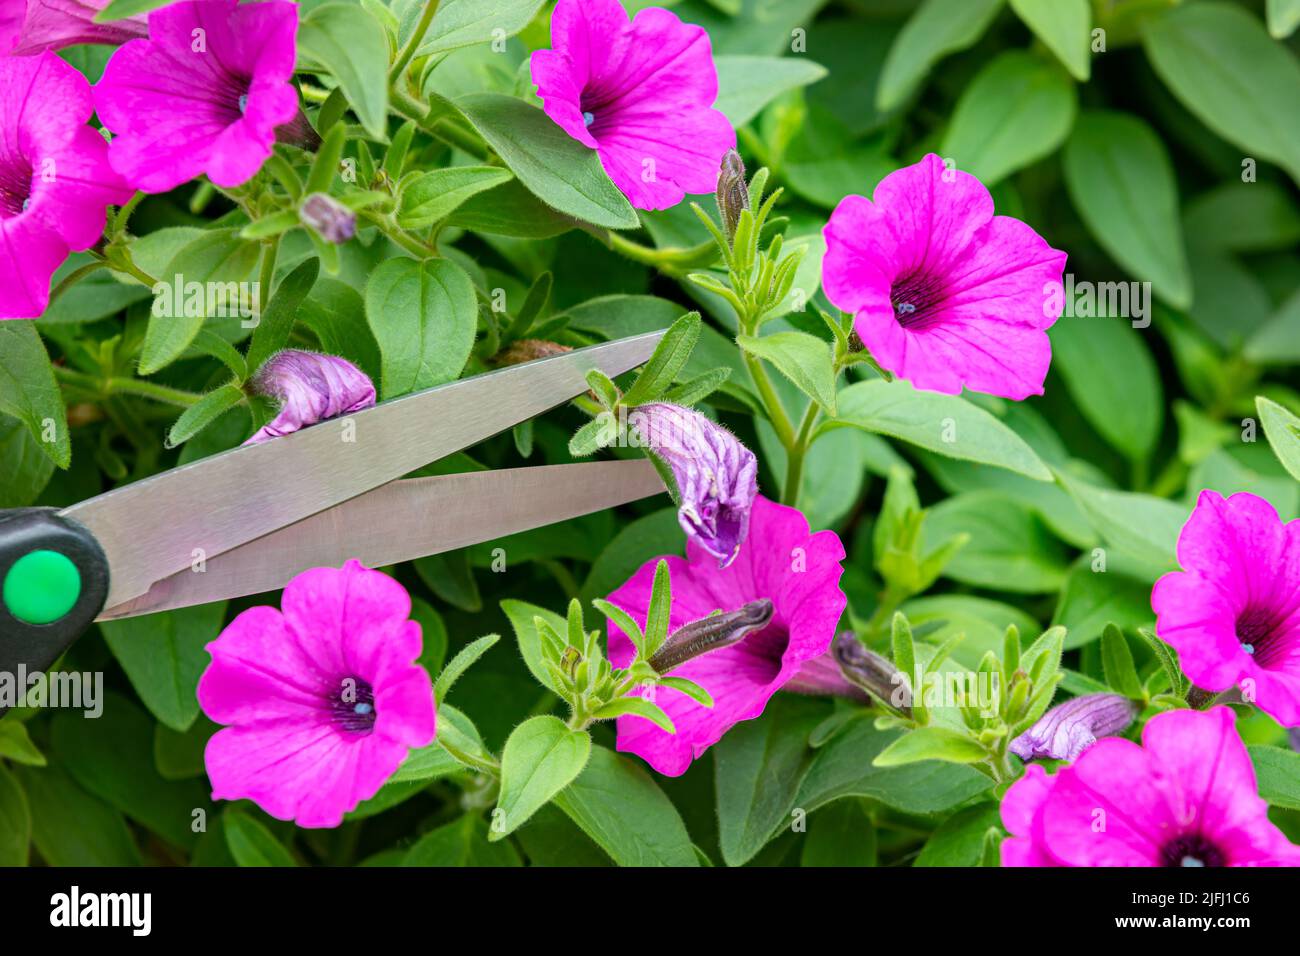 Pruning Petunia plant with wilting flowers. Deadheading, plant care and flower gardening concept. Stock Photo